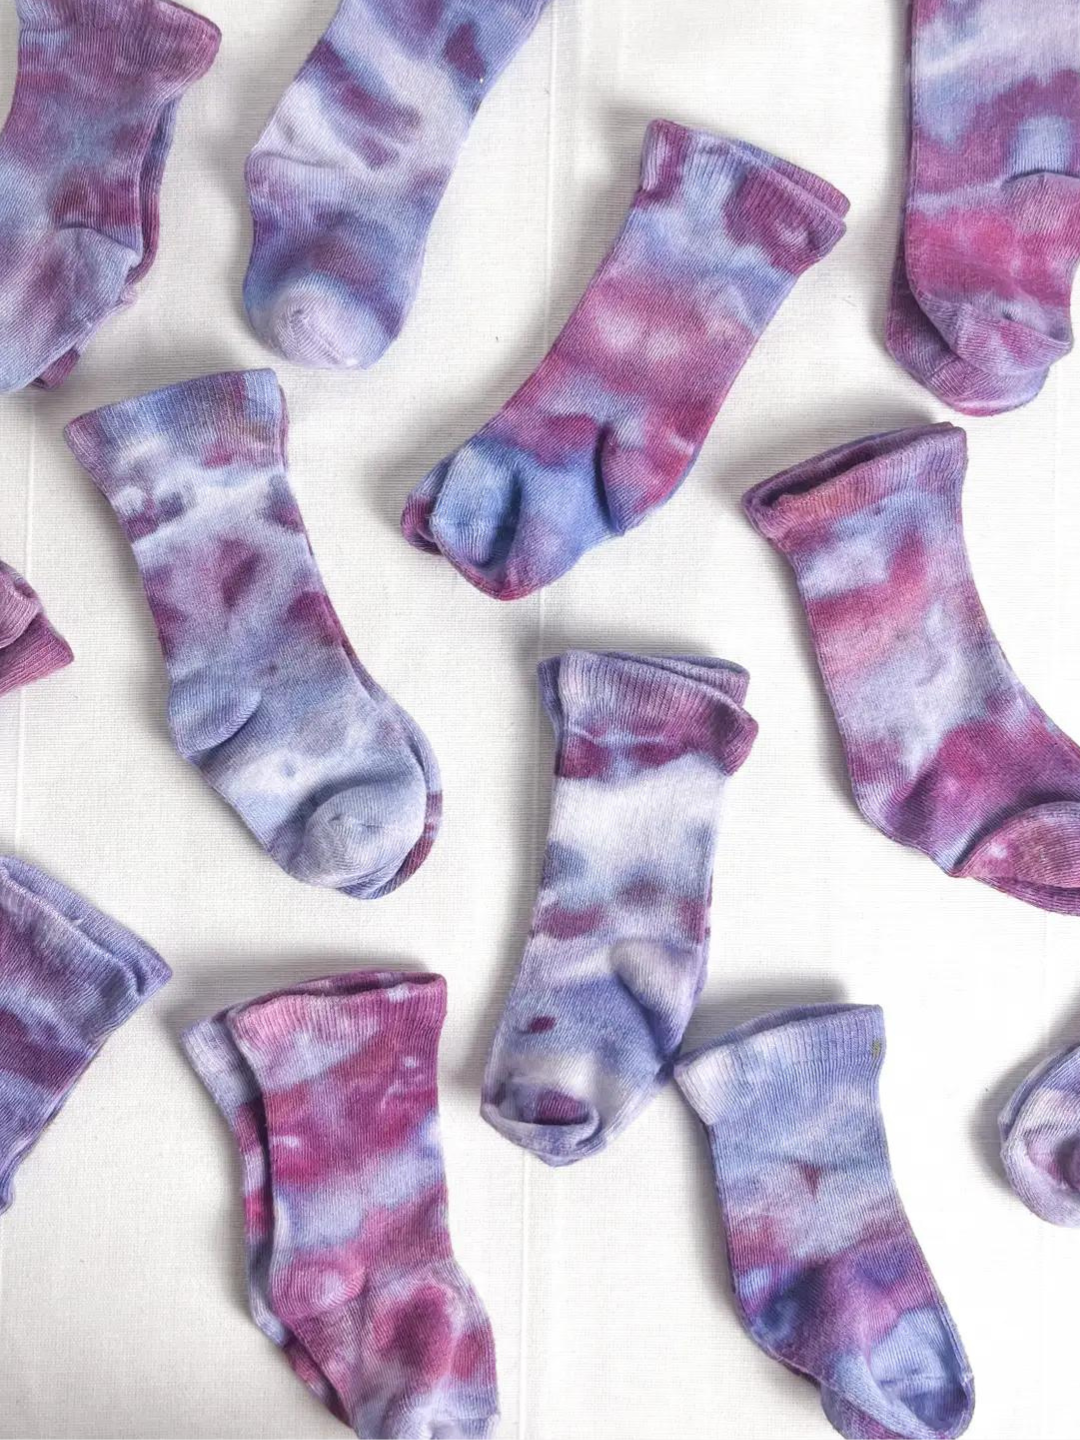 Ultraviolet | Multiple pairs of baby ankle socks in dappled shades of violet, pink and blue